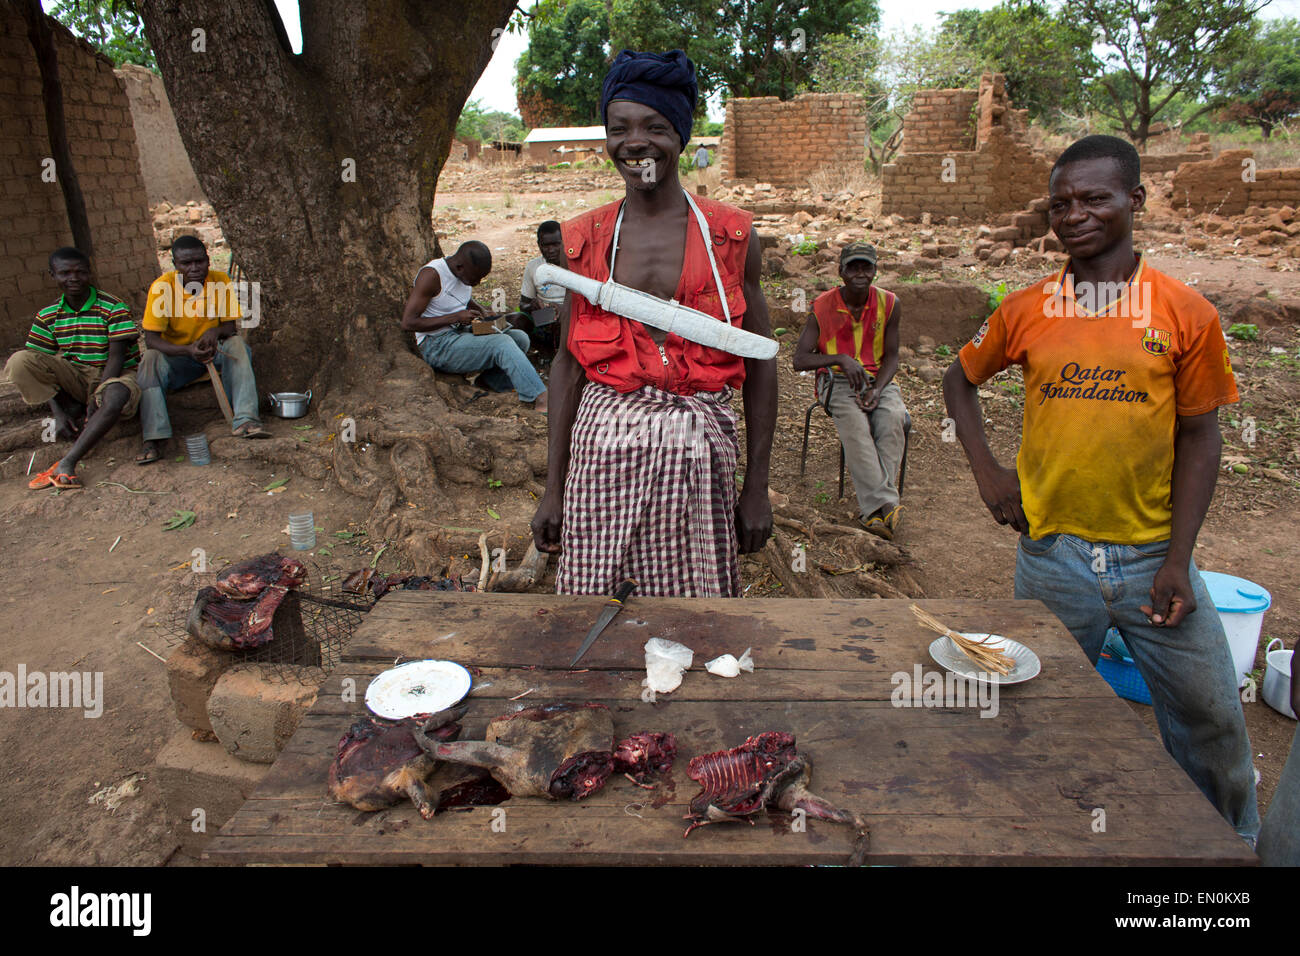 market for displaced people in CAR Stock Photo